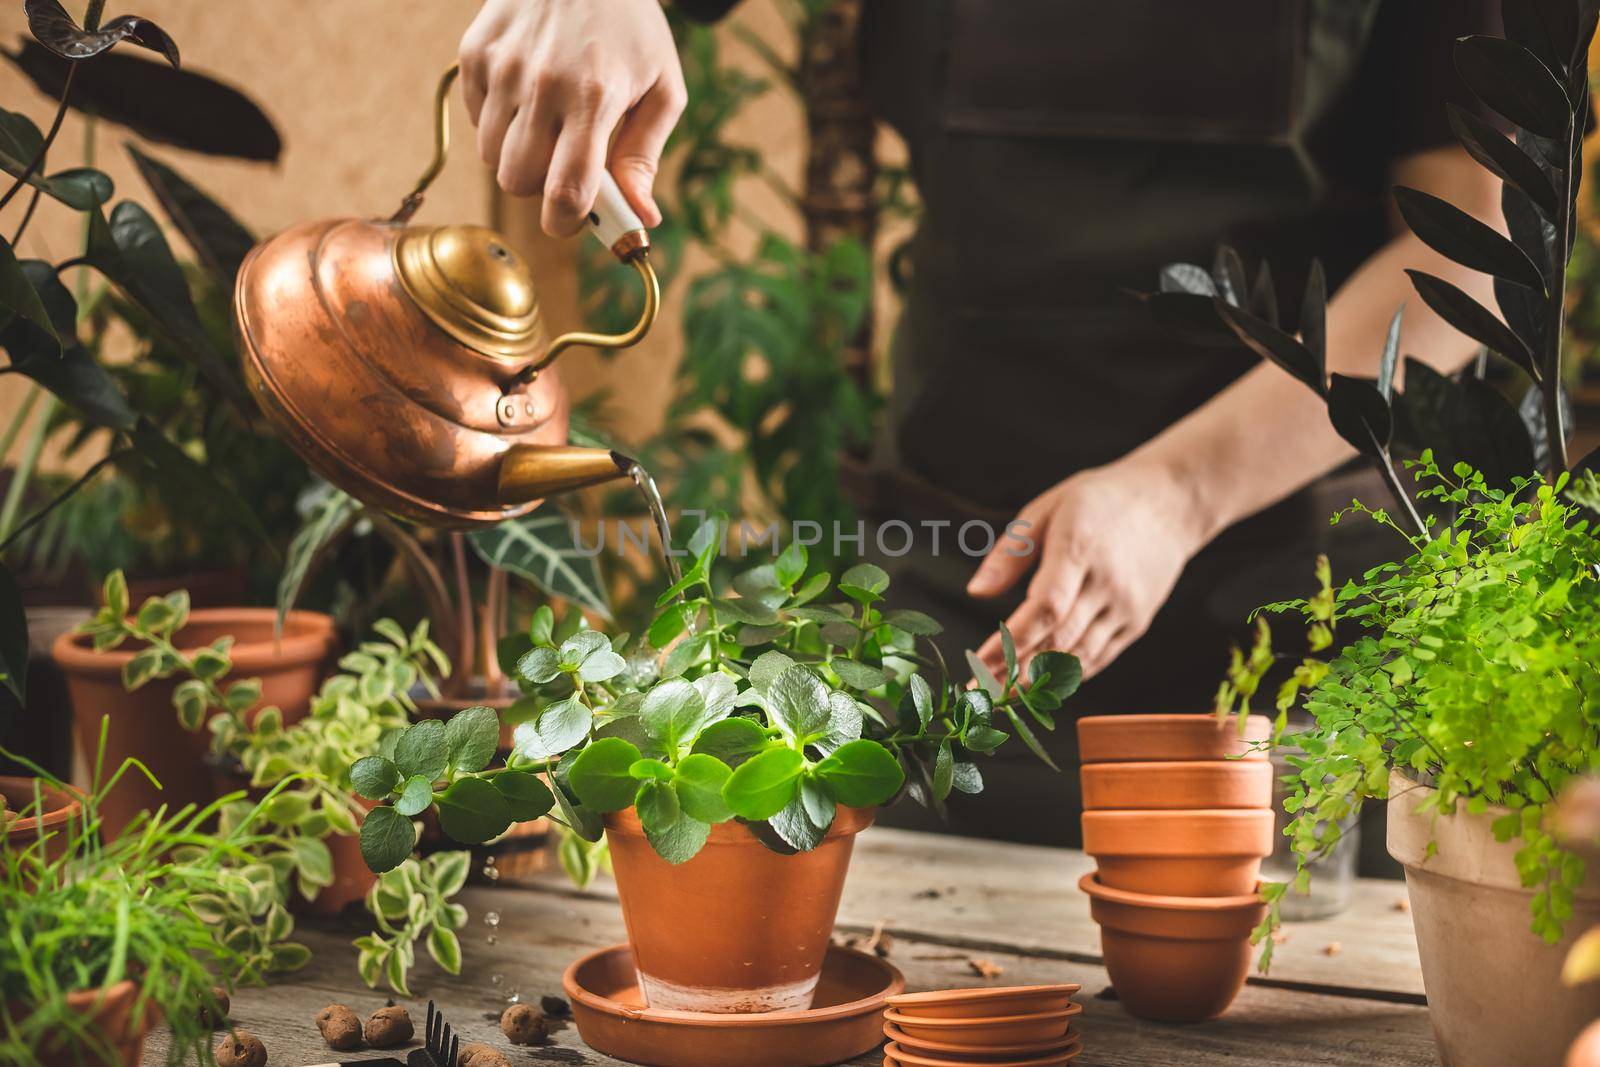 Female gardener wearing apron watering potted houseplant in greenhouse using a copper vintage teapot. Springtime plant care concept